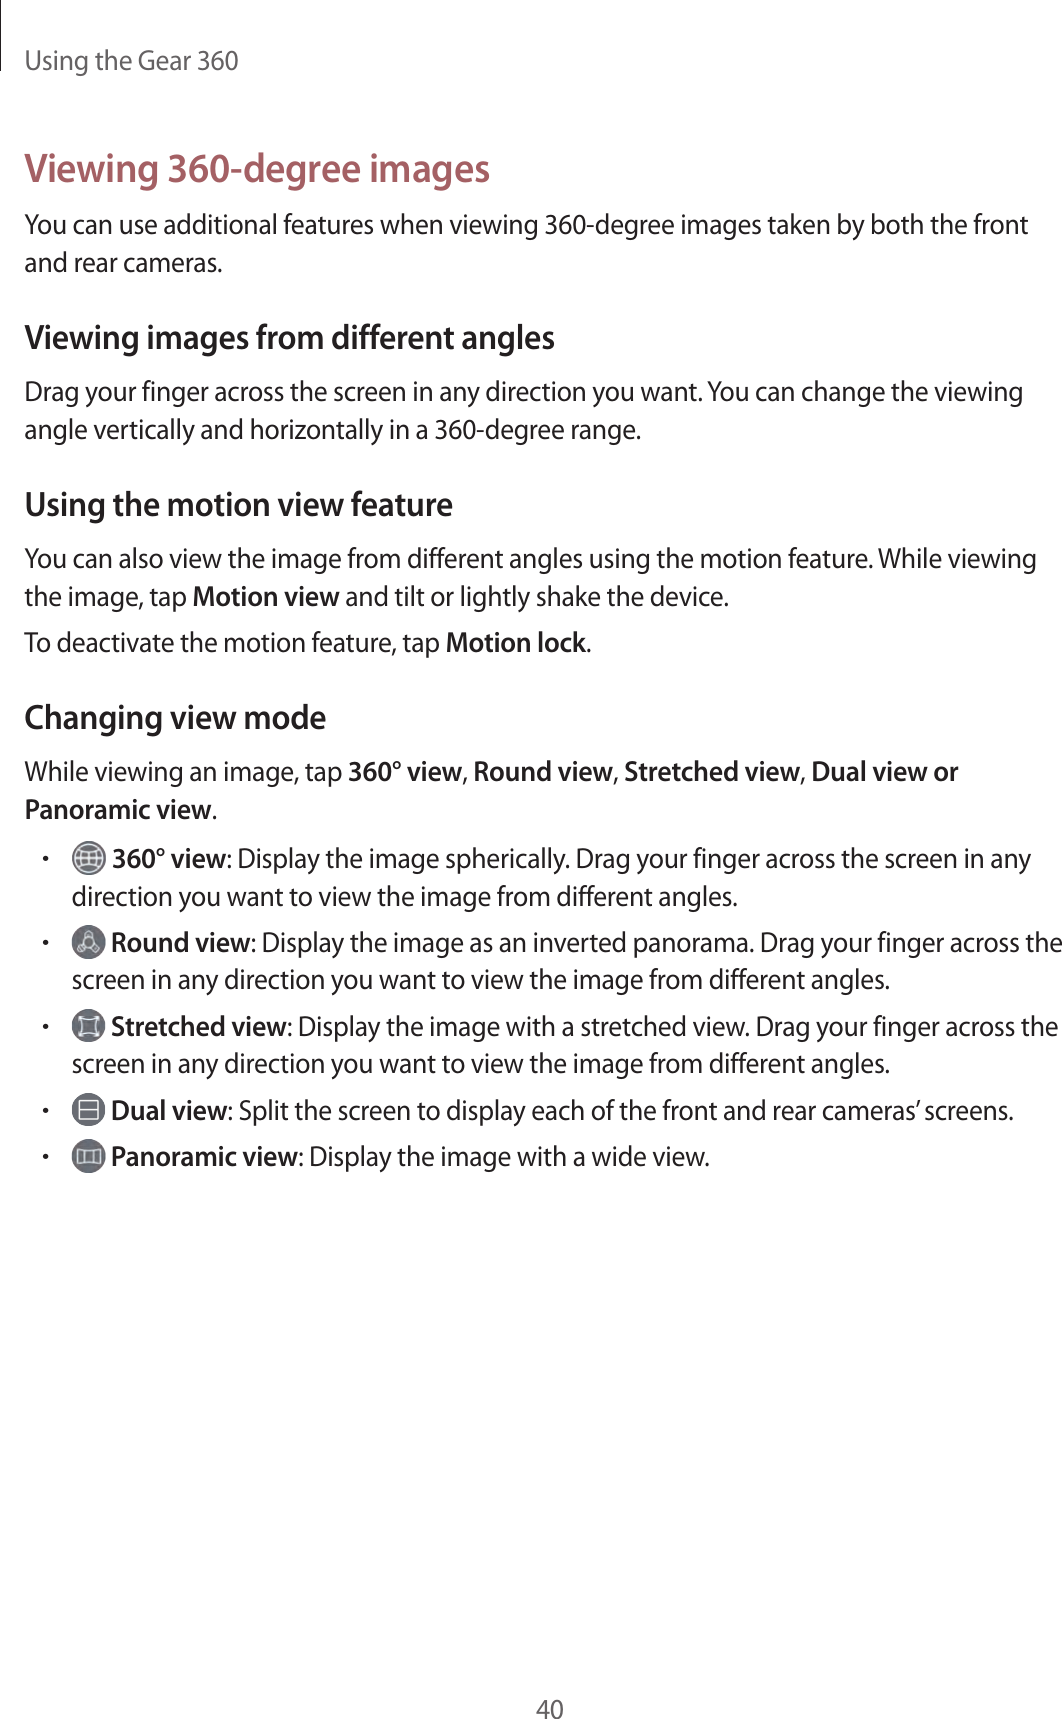 Using the Gear 36040Viewing 360-degree imagesYou can use additional features when viewing 360-degree images taken by both the front and rear cameras.Viewing images from different anglesDrag your finger across the screen in any direction you want. You can change the viewing angle vertically and horizontally in a 360-degree range.Using the motion view featureYou can also view the image from different angles using the motion feature. While viewing the image, tap Motion view and tilt or lightly shake the device.To deactivate the motion feature, tap Motion lock.Changing view modeWhile viewing an image, tap 360° view, Round view, Stretched view, Dual view or Panoramic view.• 360° view: Display the image spherically. Drag your finger across the screen in any direction you want to view the image from different angles.• Round view: Display the image as an inverted panorama. Drag your finger across the screen in any direction you want to view the image from different angles.• Stretched view: Display the image with a stretched view. Drag your finger across the screen in any direction you want to view the image from different angles.• Dual view: Split the screen to display each of the front and rear cameras’ screens.• Panoramic view: Display the image with a wide view.